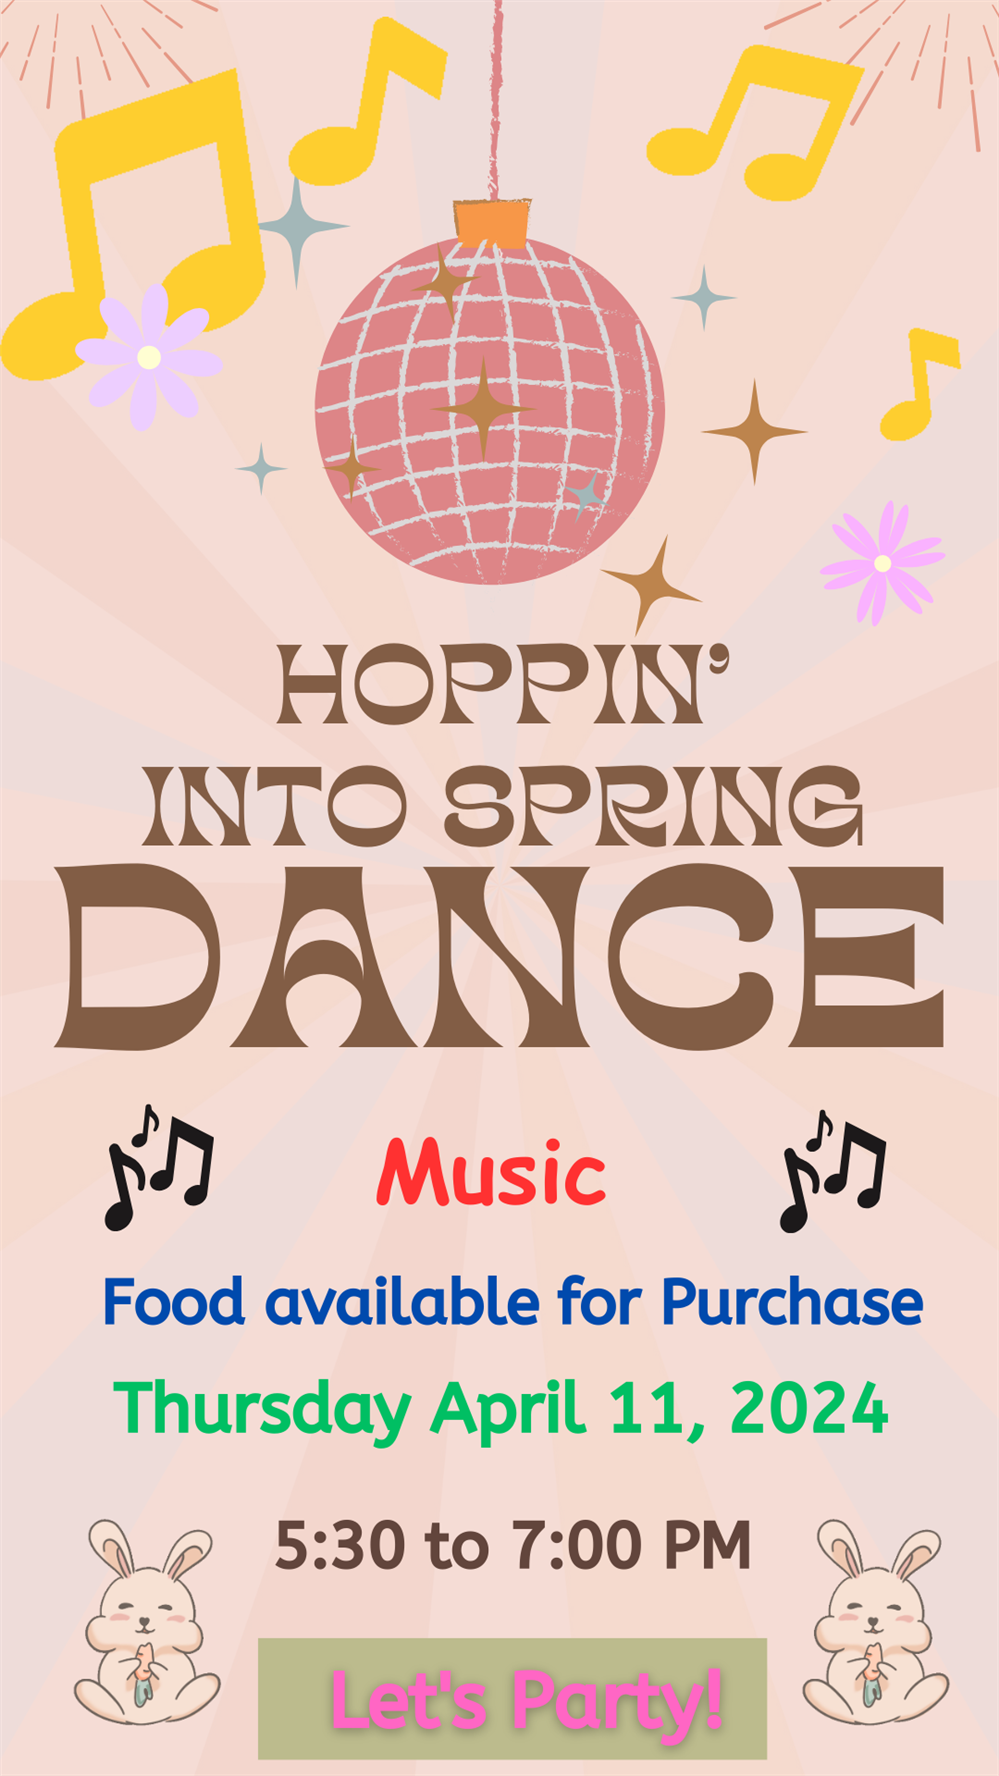 Dance tickets on sale now for $5.00